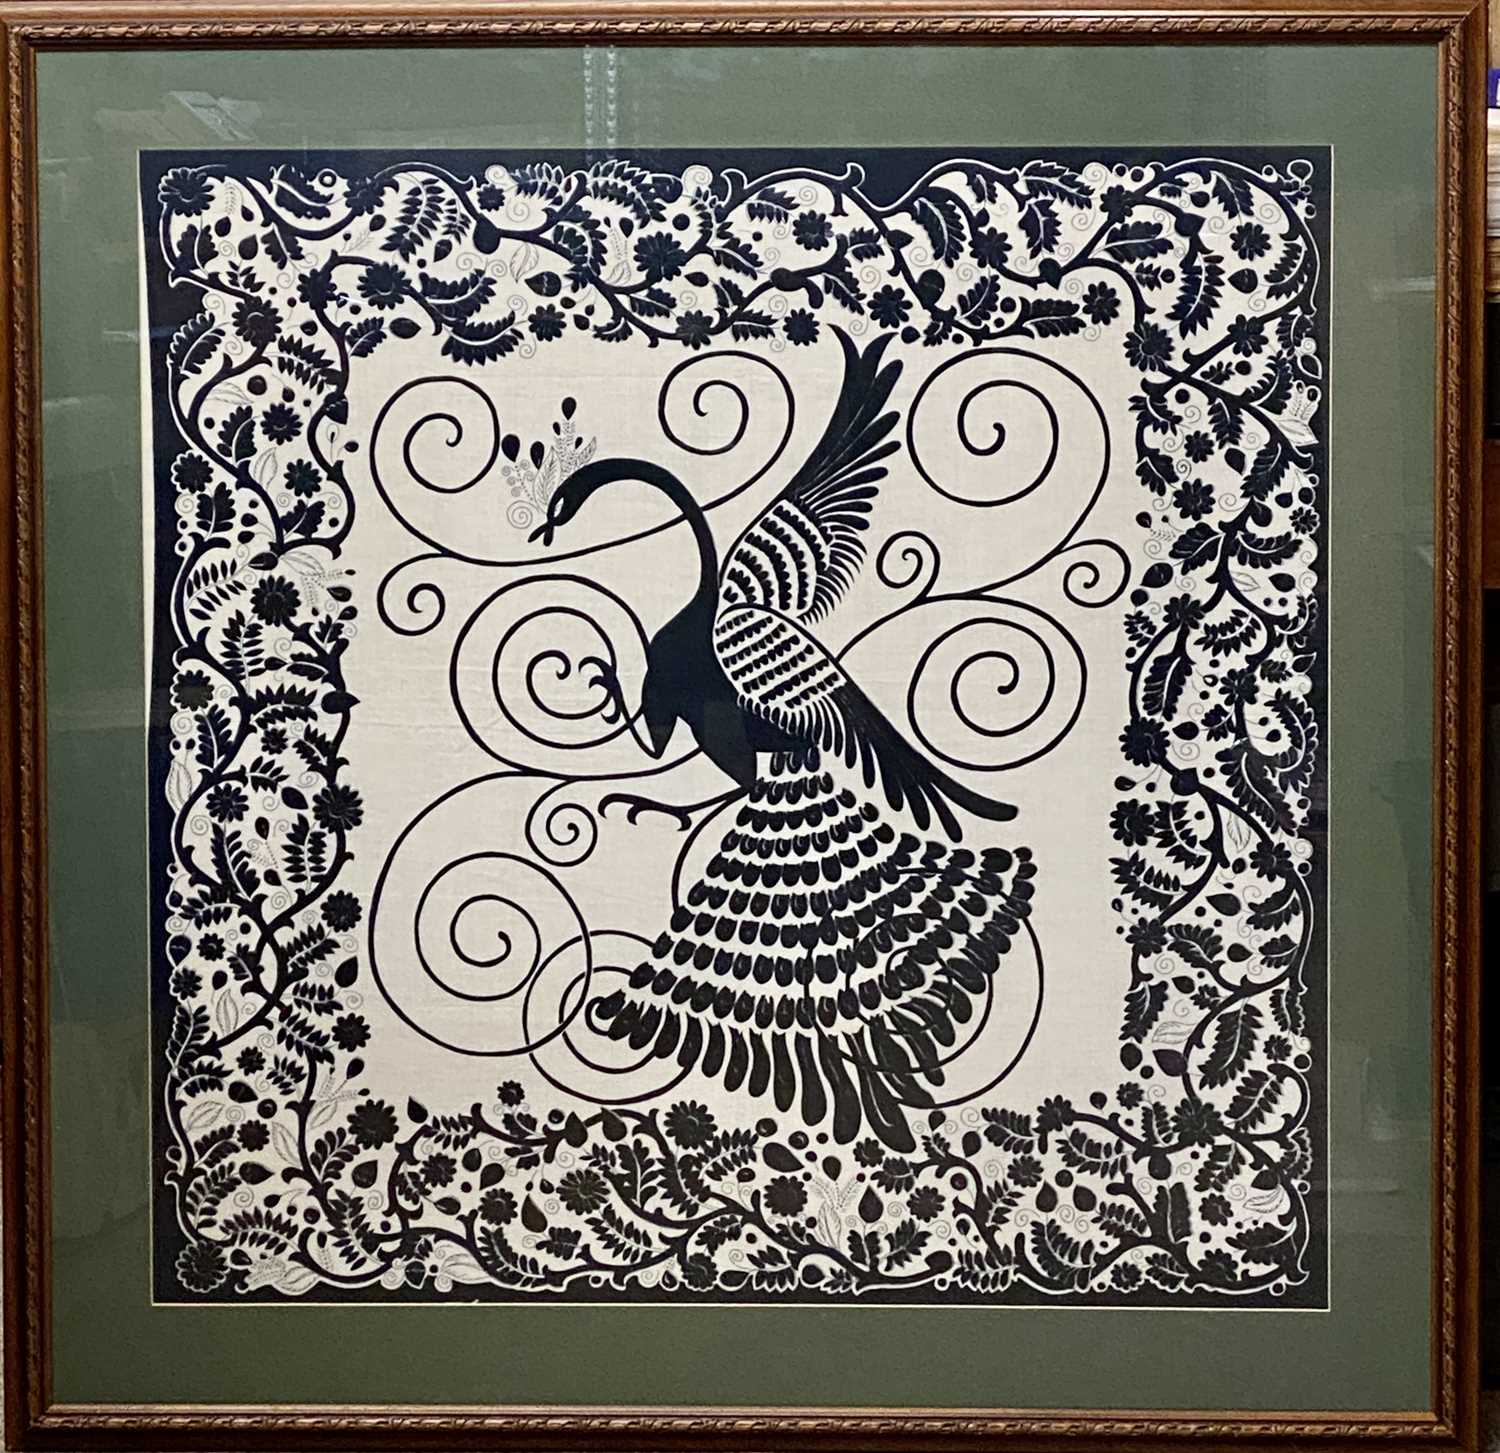 CHINESE SCREEN PRINT - in black and white depicting a peacock within a floral border, 81 x 82cms - Image 2 of 2